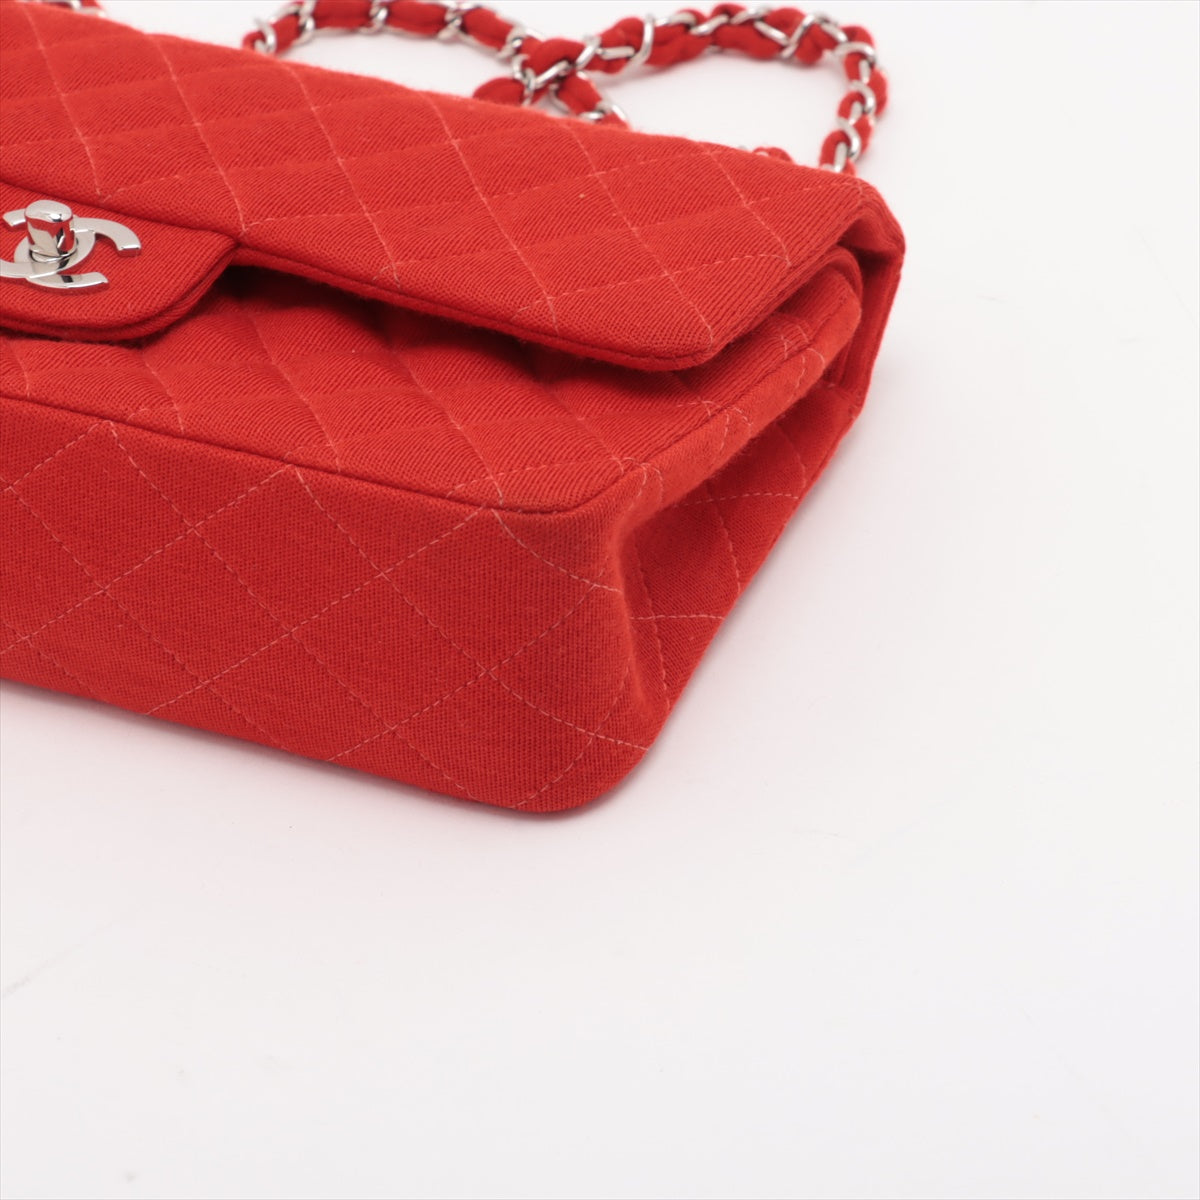 Chanel Matrasse 25 Cotton Double Flap Double Chain Bag Red Silver G  5th A01112